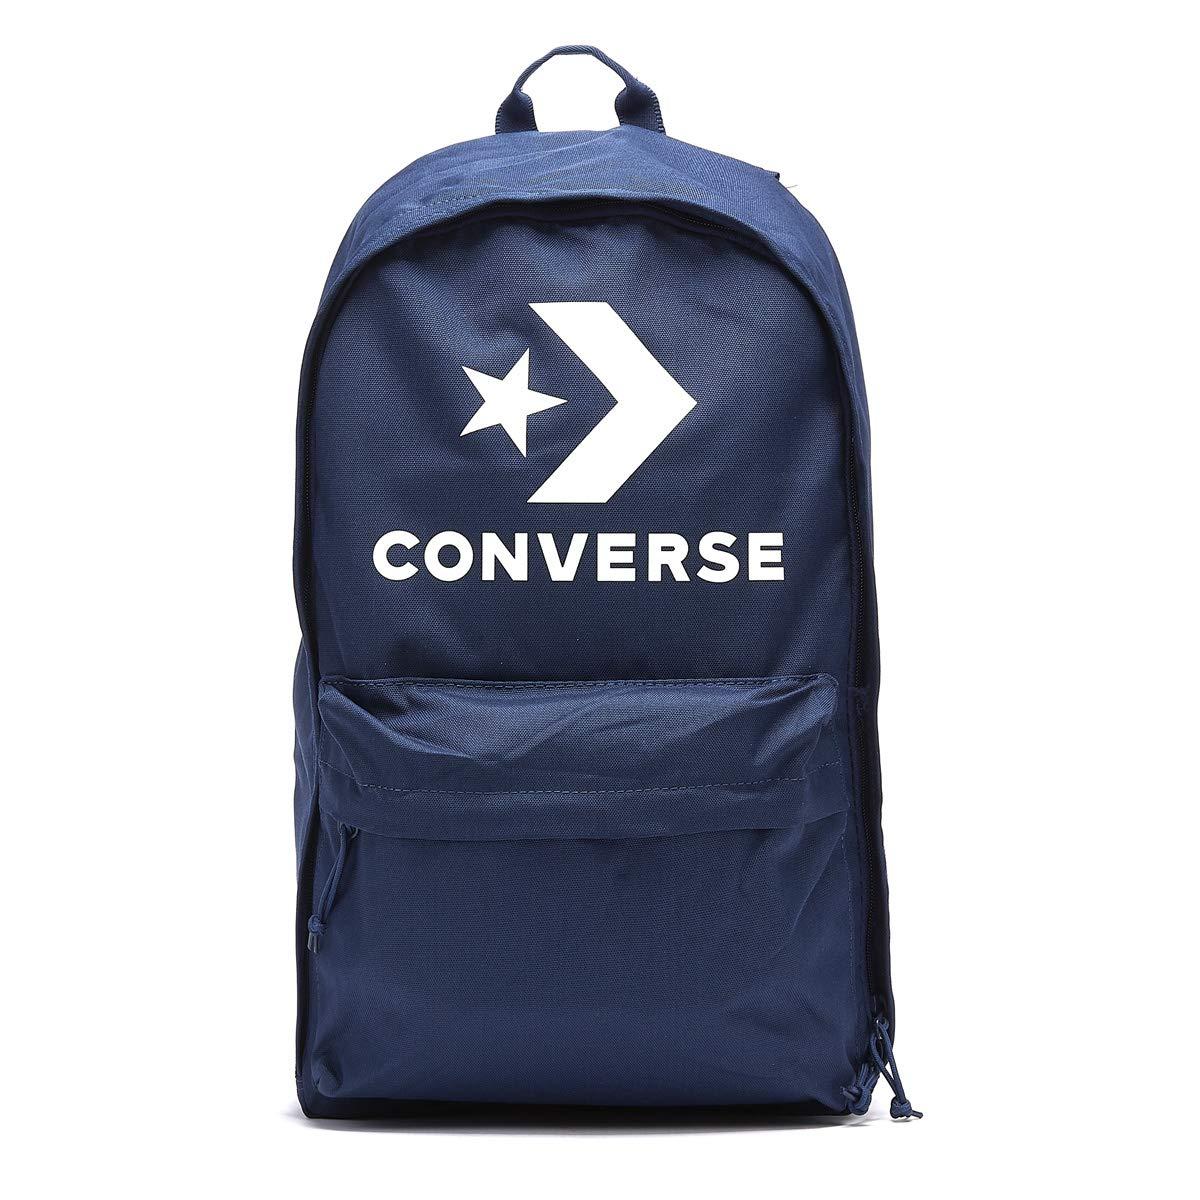 Converse Go Backpack | Product Review - YouTube